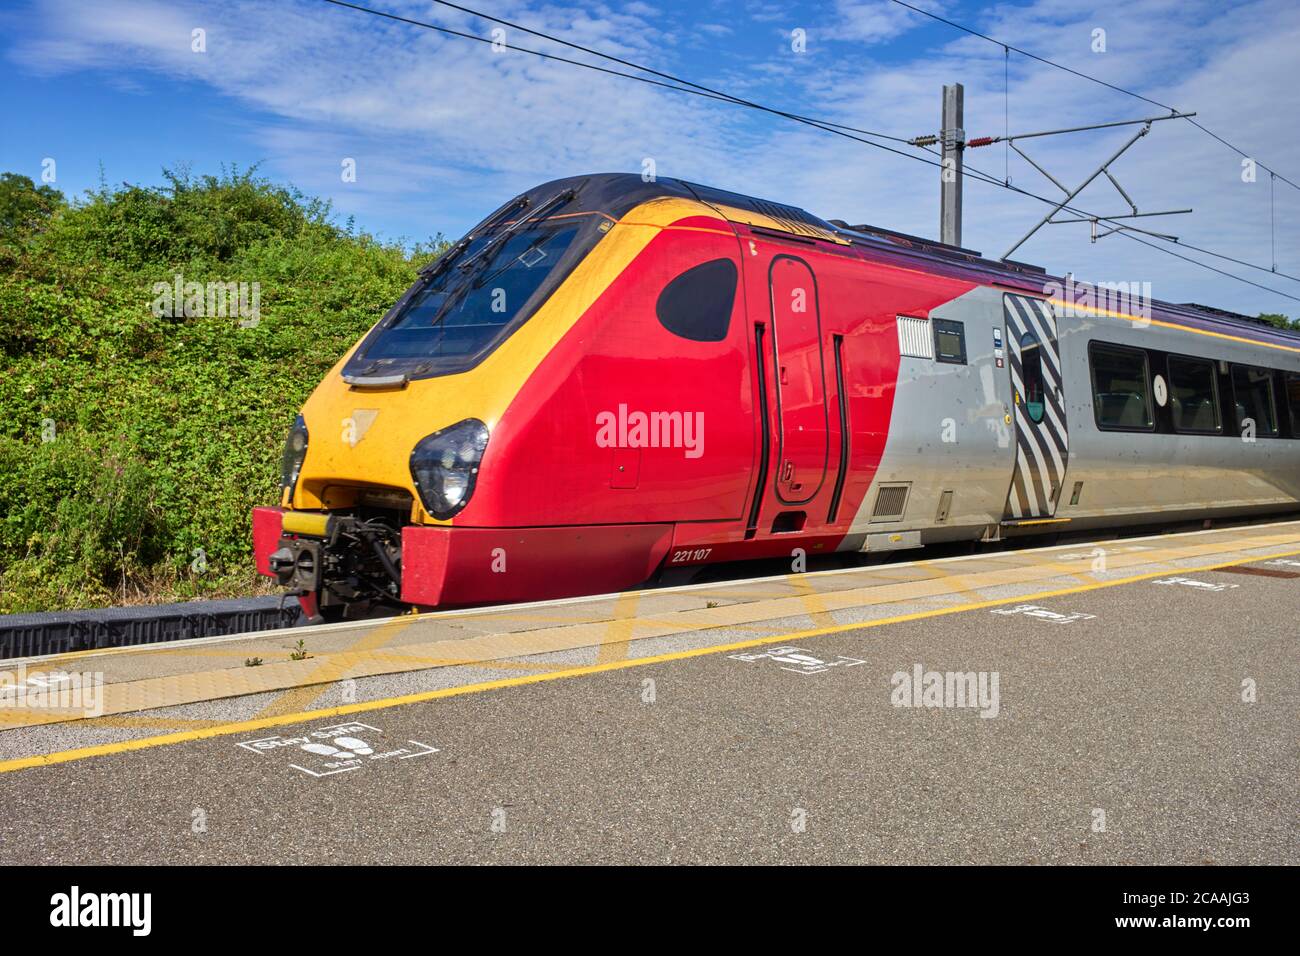 Arriva Pendalino train still in Virgin livery at Milton Keynes station with stay safe, stay apart instructions on the platform. Note the stone chip da Stock Photo